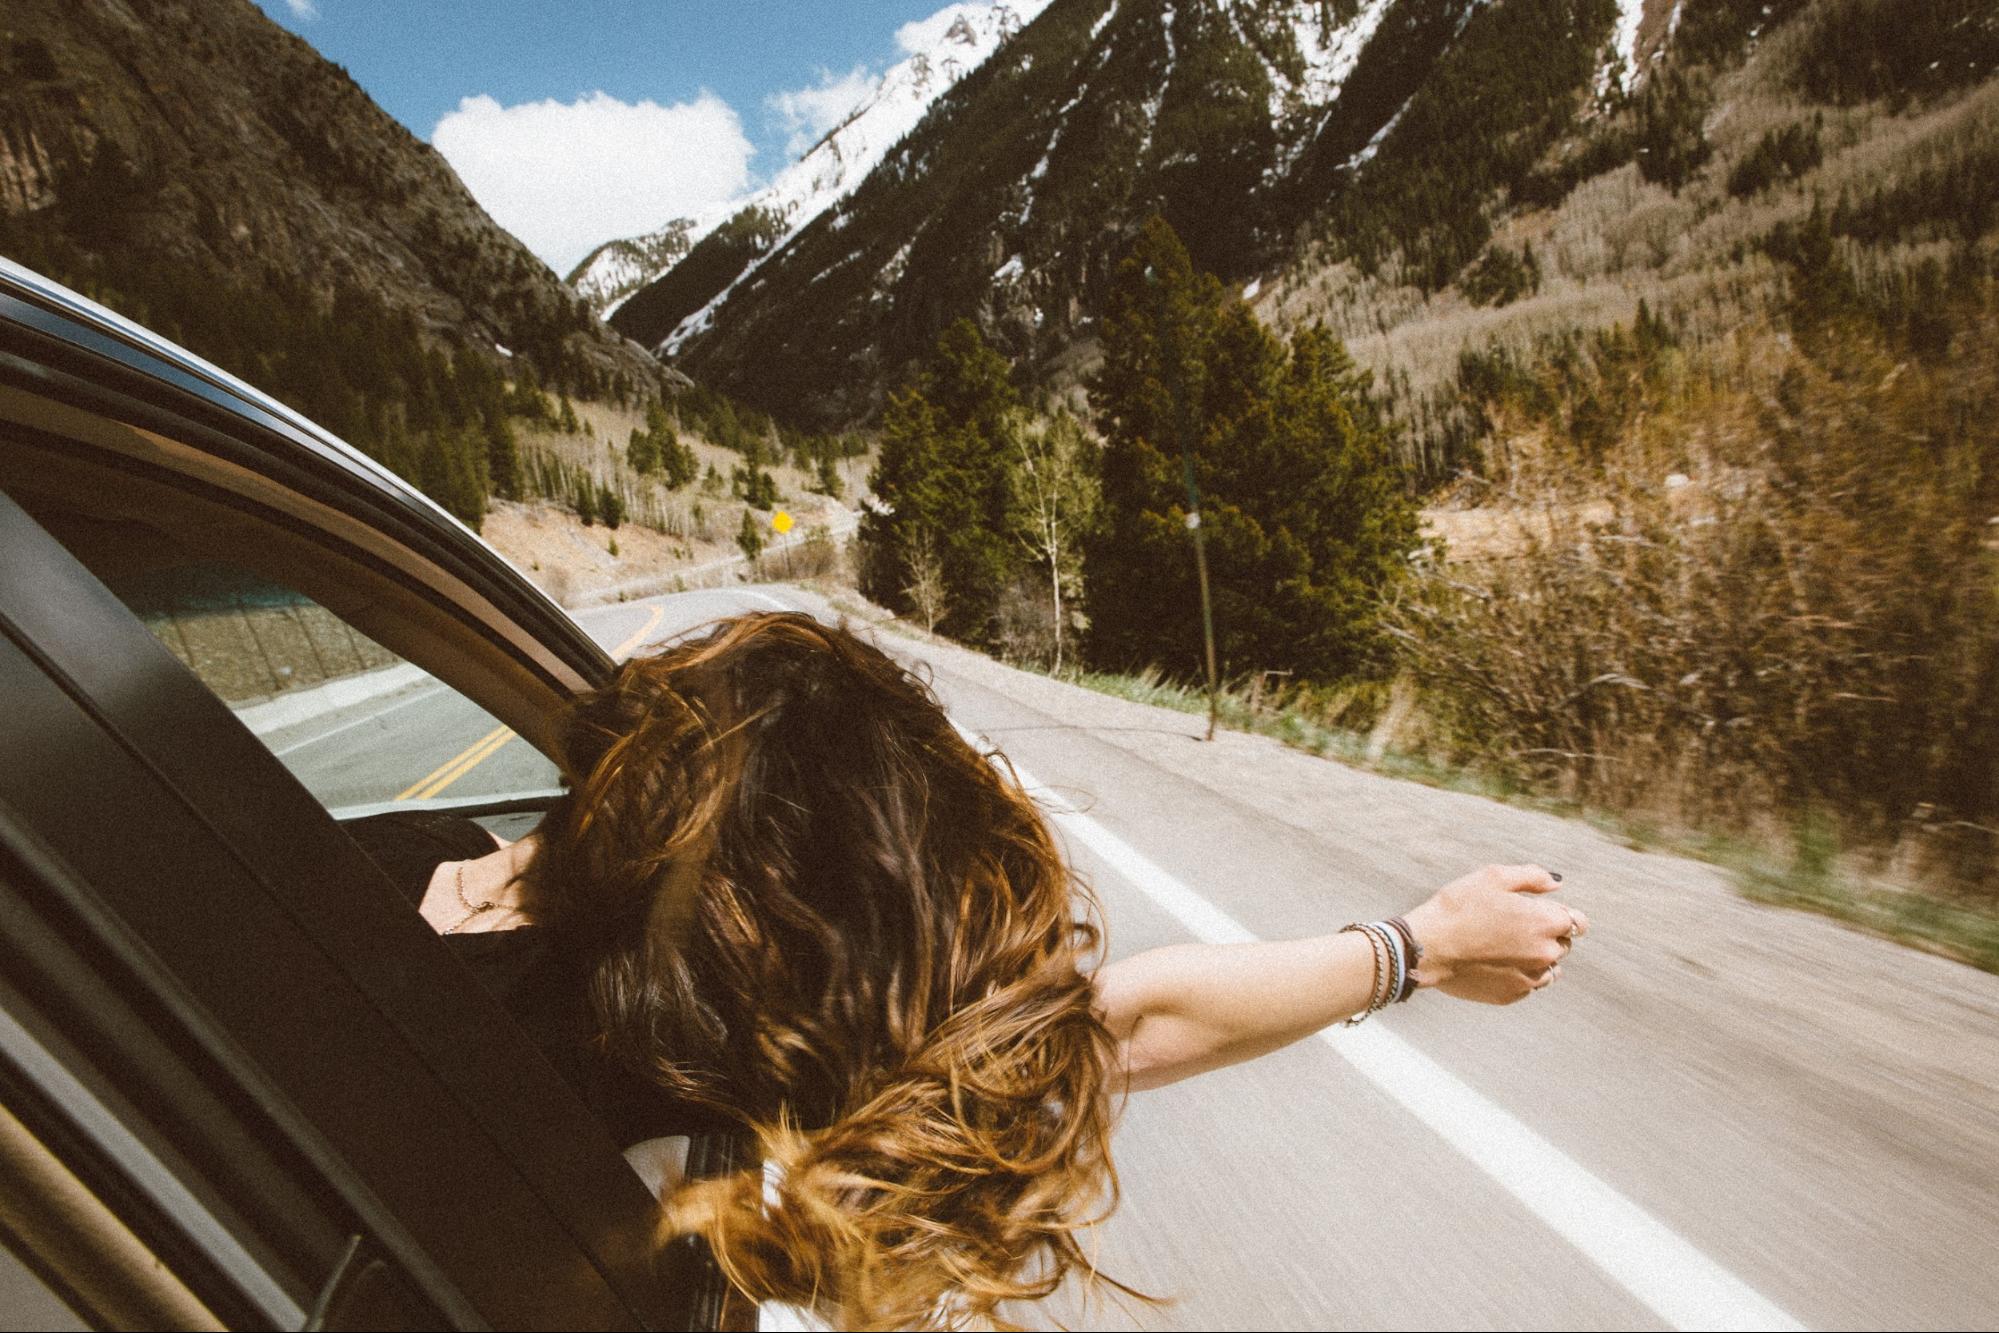 Young girl with her head and right hand out of the car on a road trip